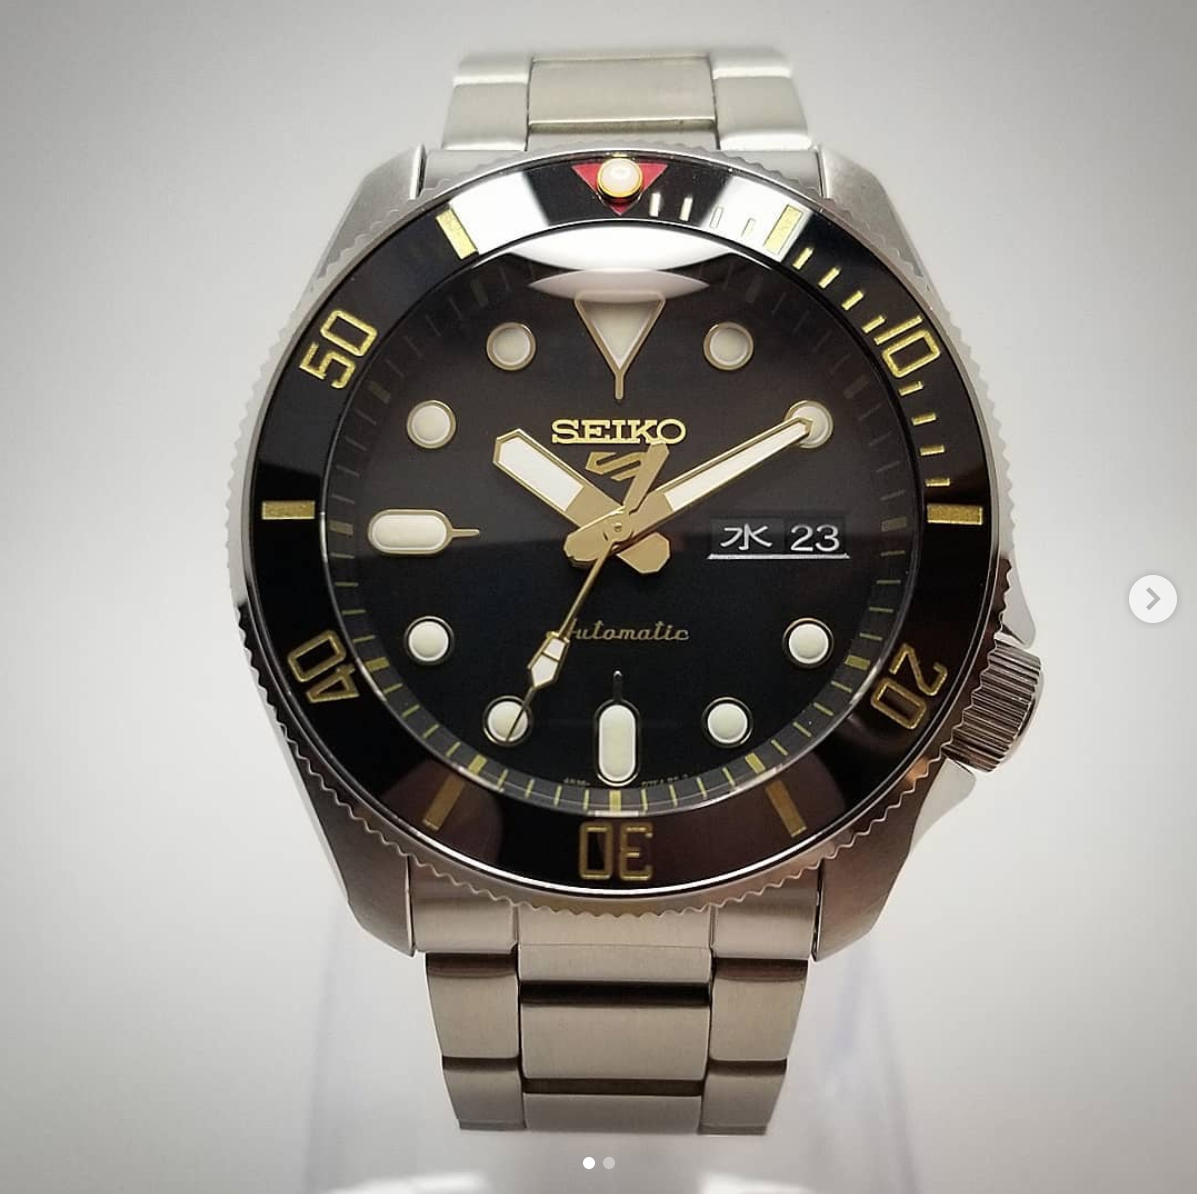 Seiko modding in 2020 is just getting better and better